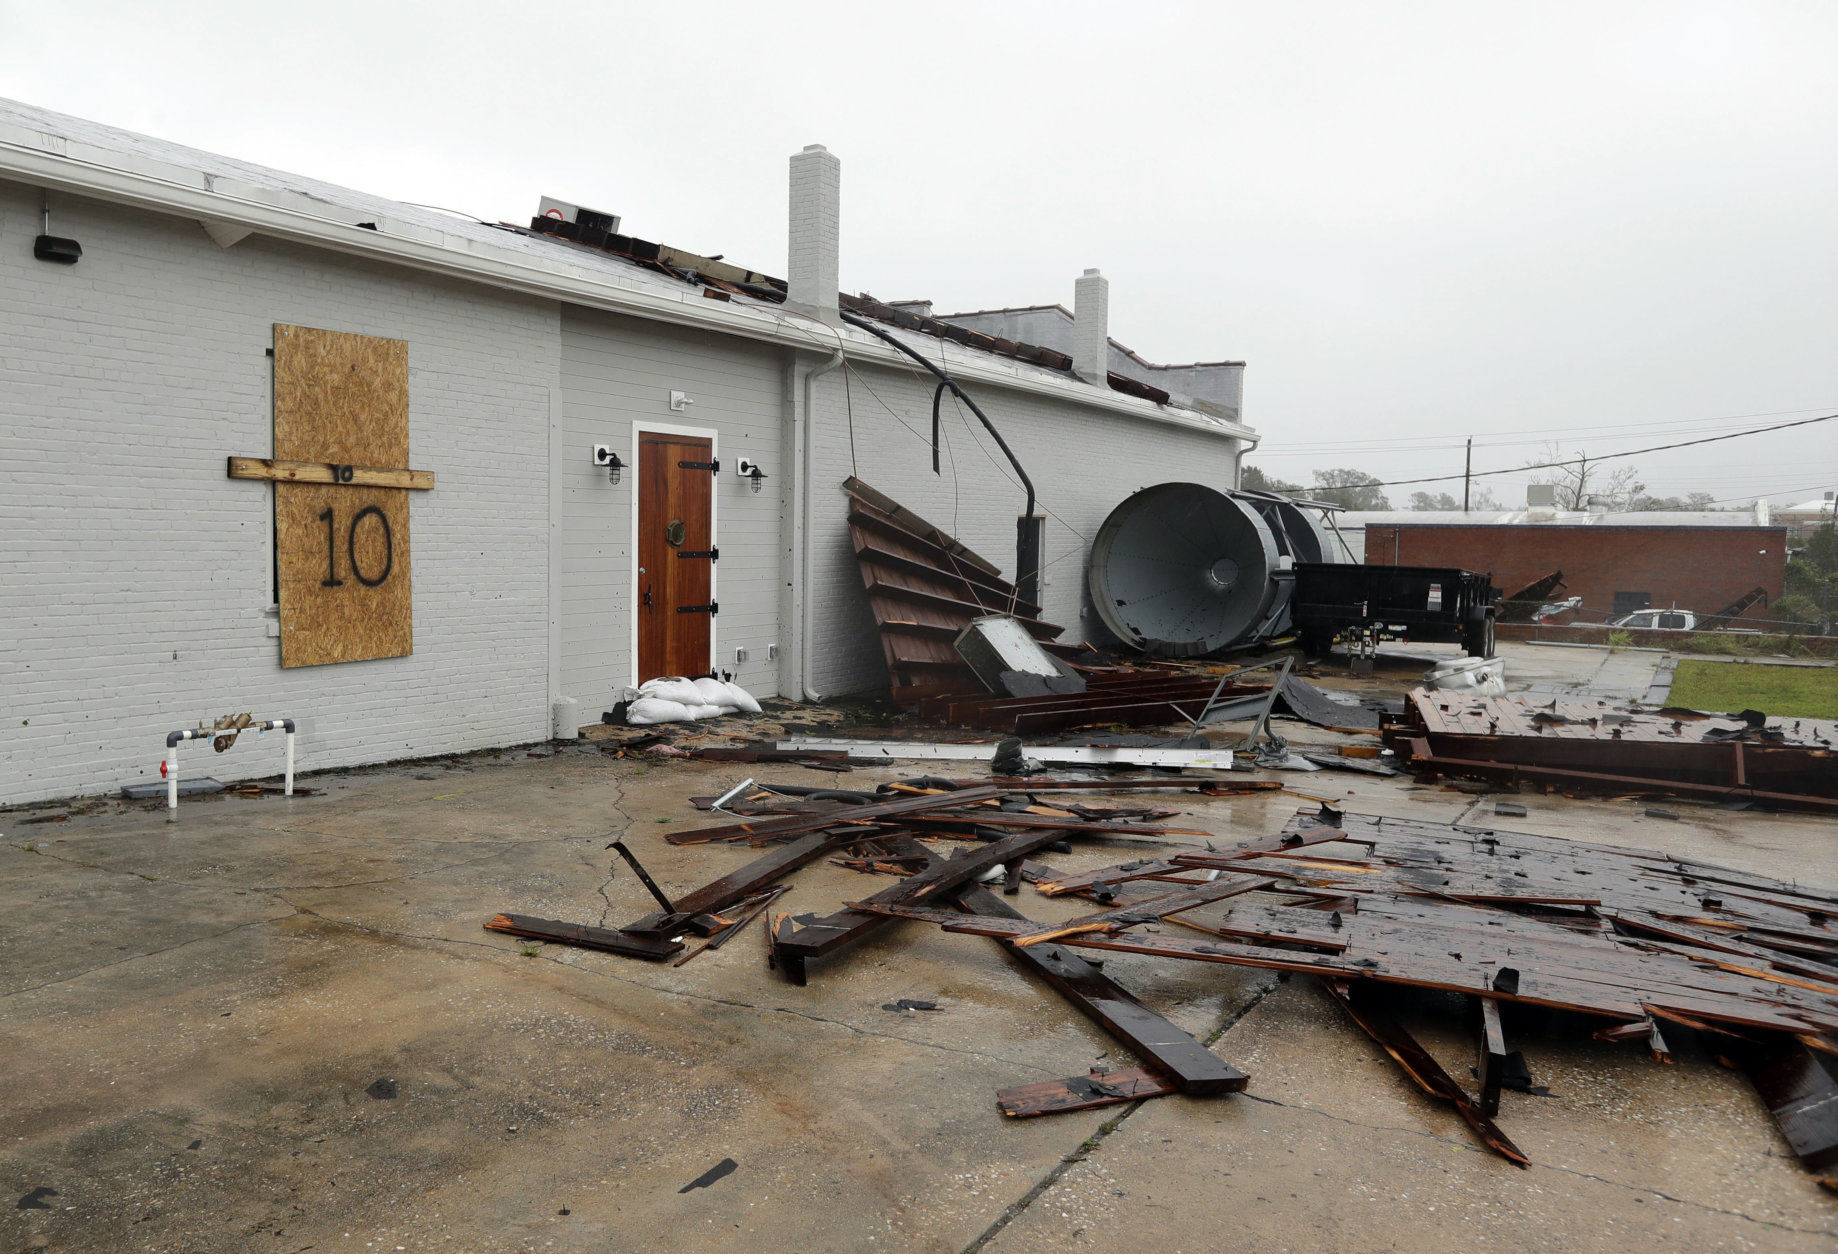 Part of the roof of Tidewater Brewing Co. lies on the ground in Wilmington, N.C., after Hurricane Florence made landfall Friday, Sept. 14, 2018. (AP Photo/Chuck Burton)